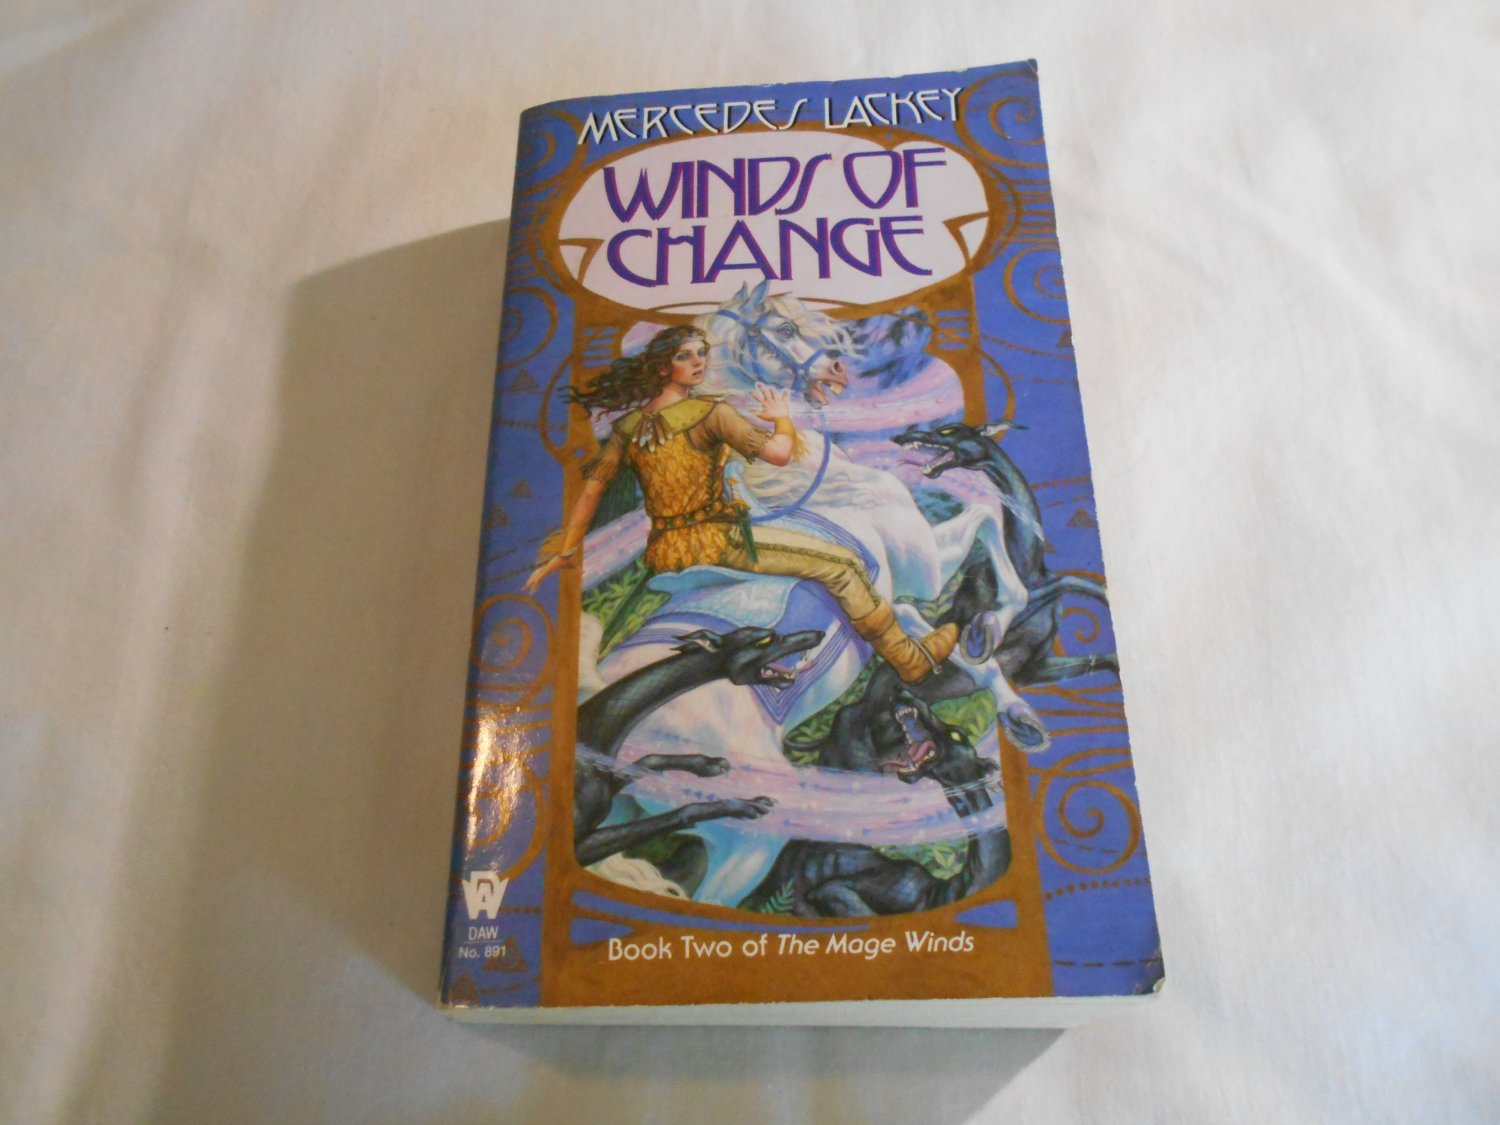 Winds of Fate by Mercedes Lackey